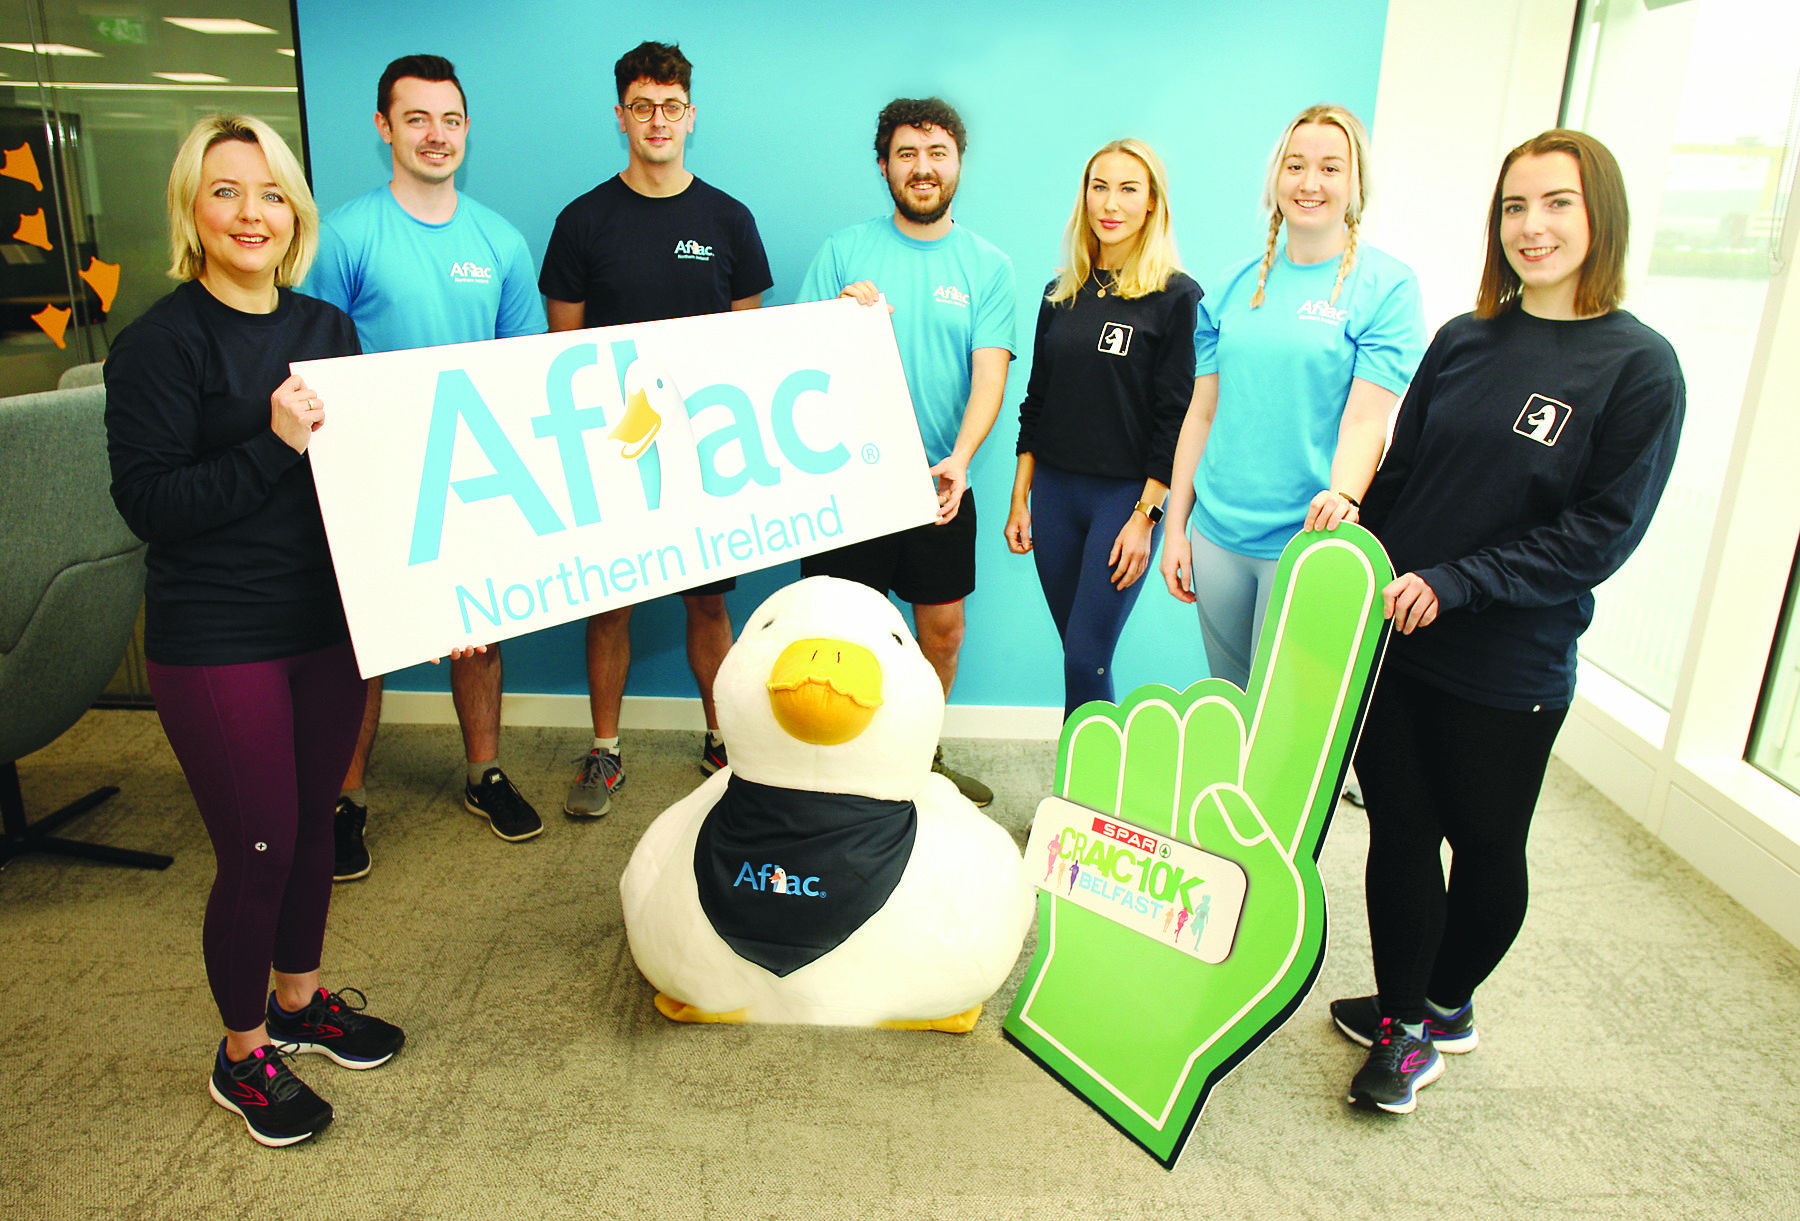 Staff at Aflac NI are gearing up for the SPAR Craic 10k